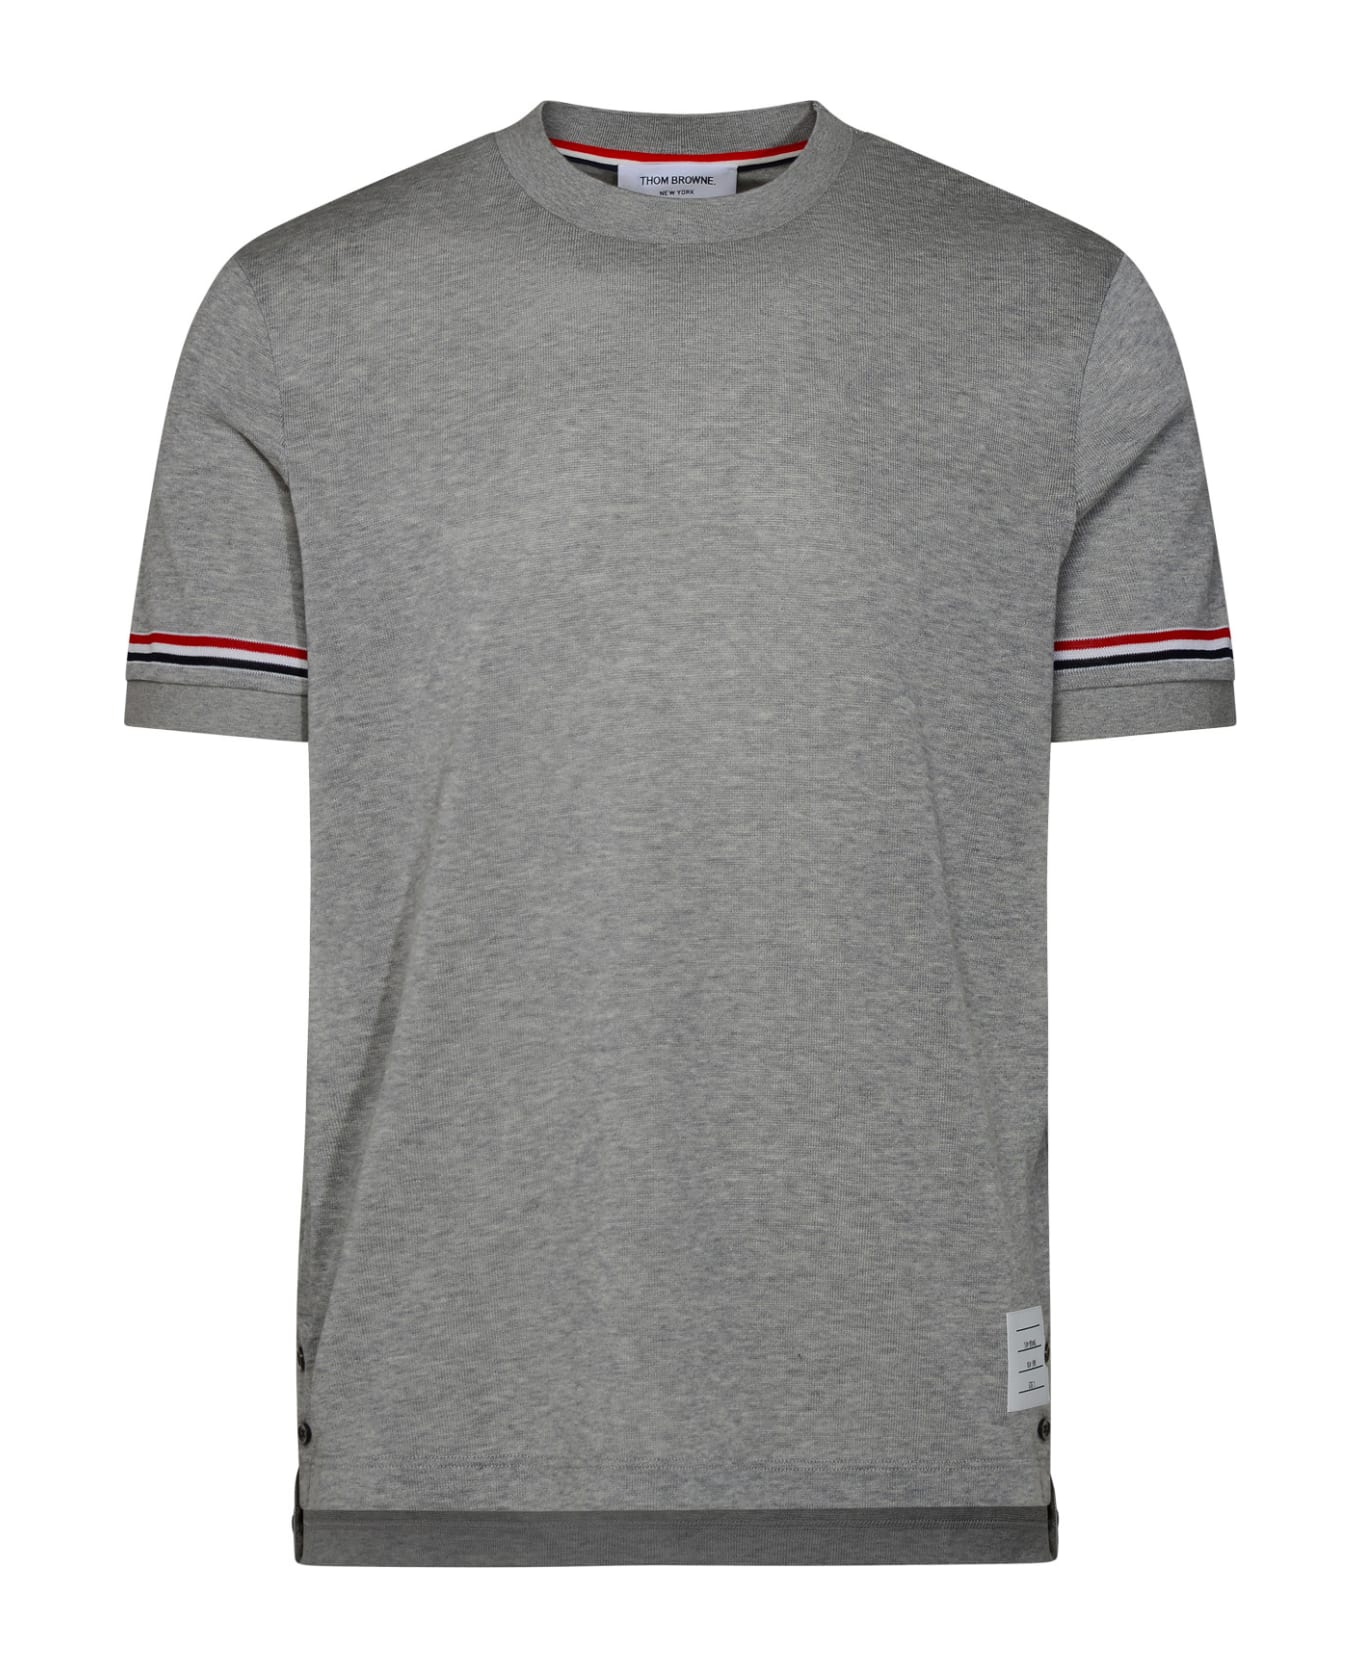 Thom Browne Gray Cotton T-shirt - Med Grey